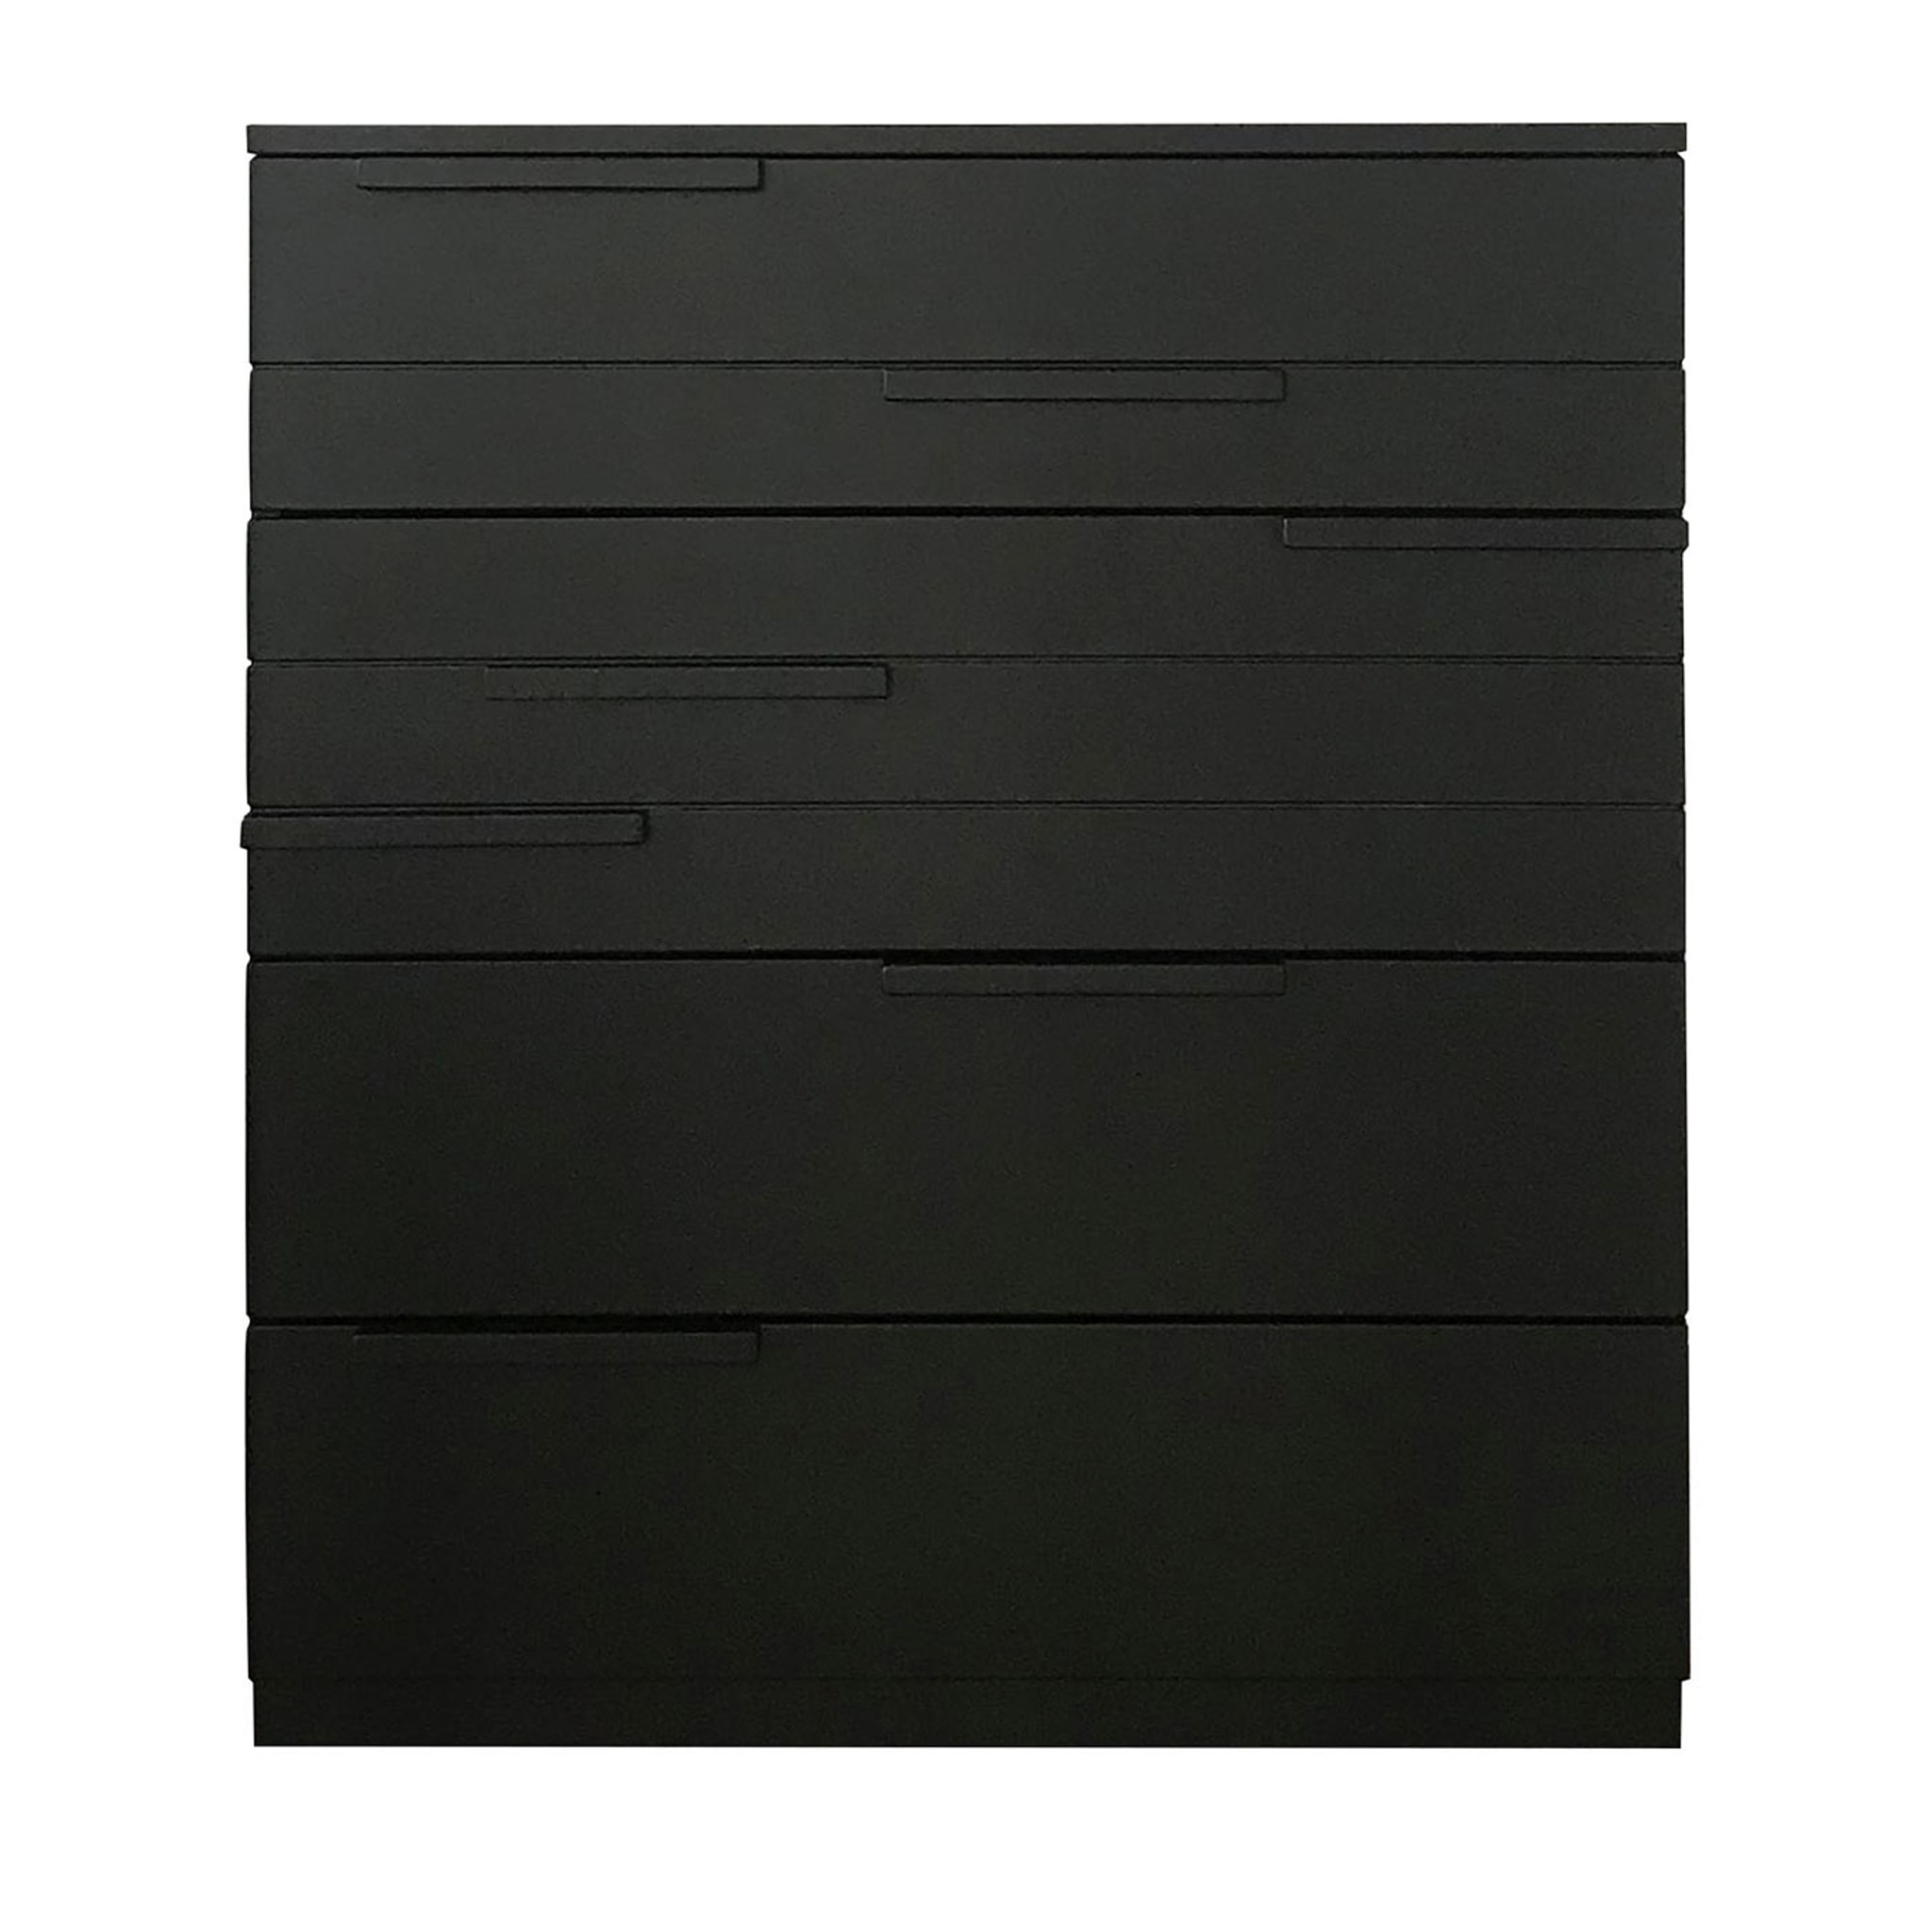 Benedetta Black Chest of Drawers - Main view